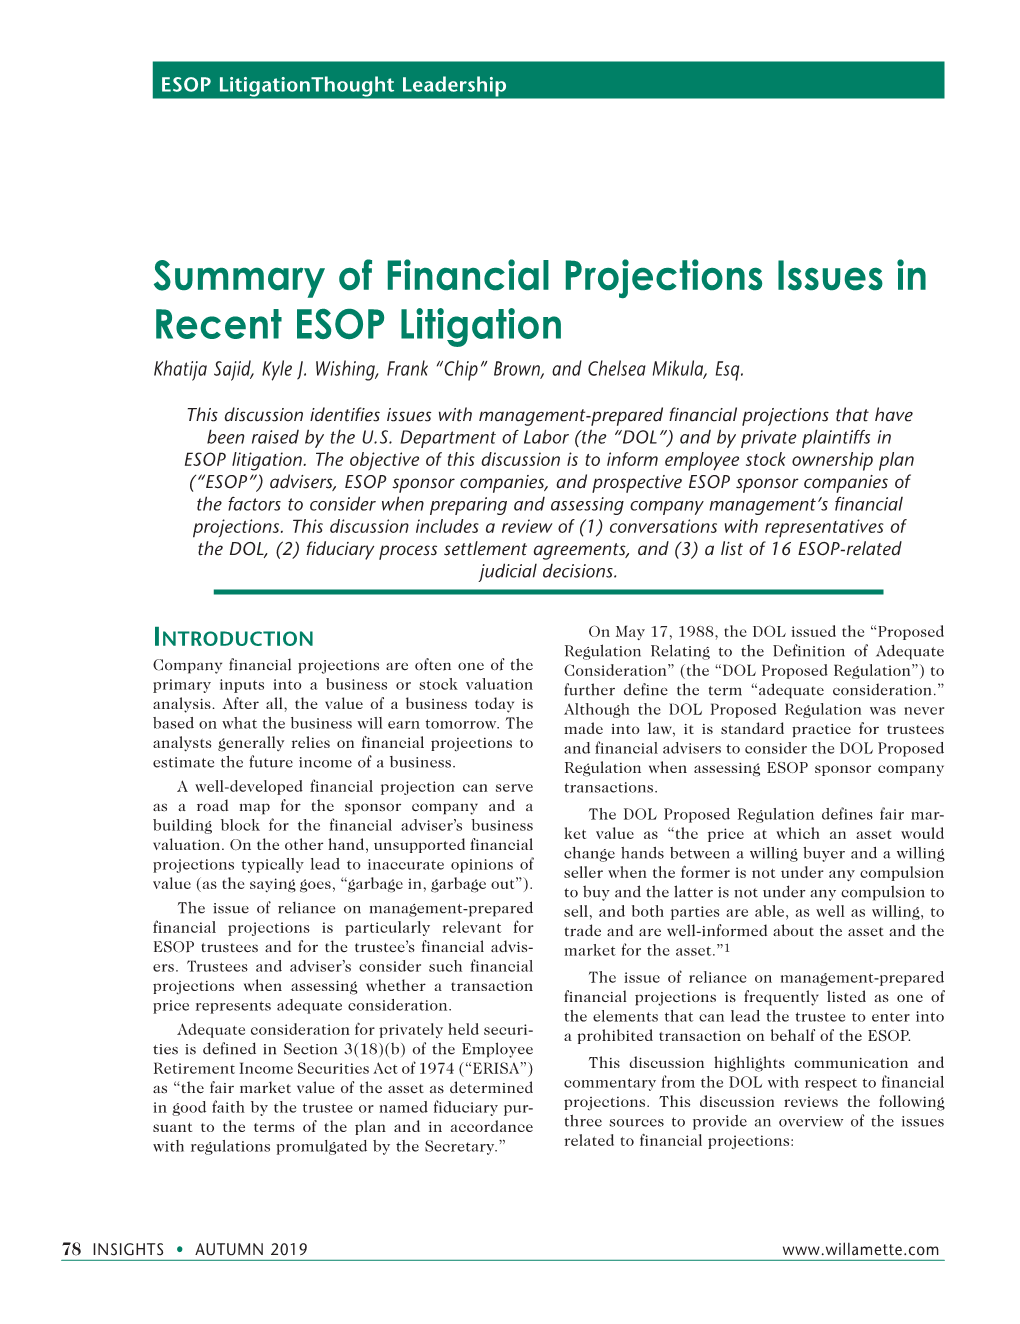 Summary of Financial Projections Issues in Recent ESOP Litigation Khatija Sajid, Kyle J